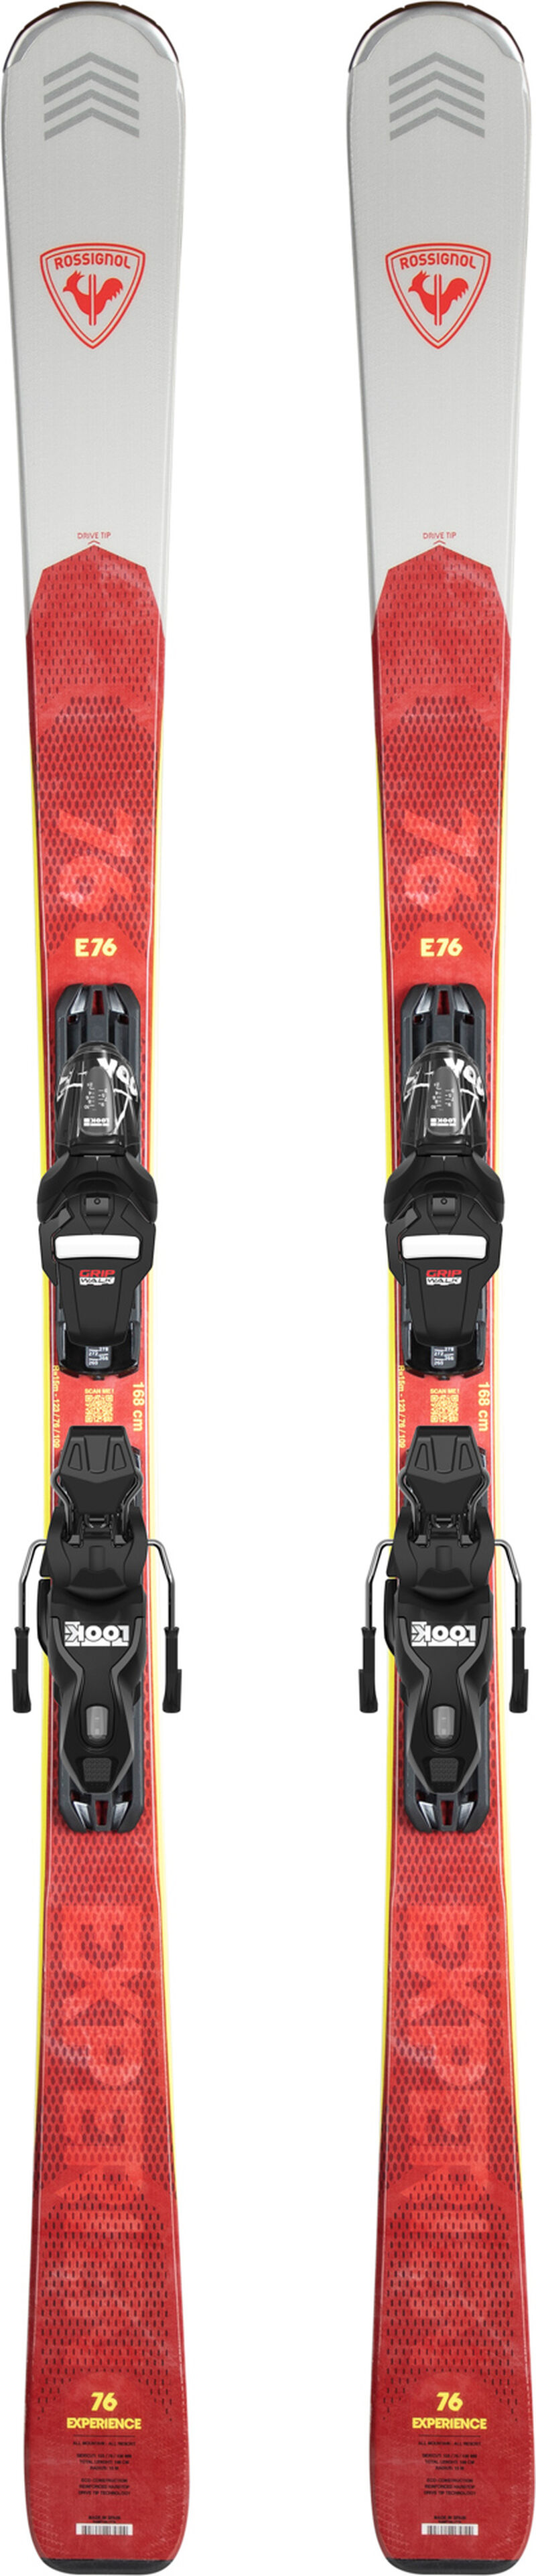 HOUSSE DE SKI ROSSIGNOL HERO WHEELED RED 2/3 PAIRES 2.10 M AN 2018